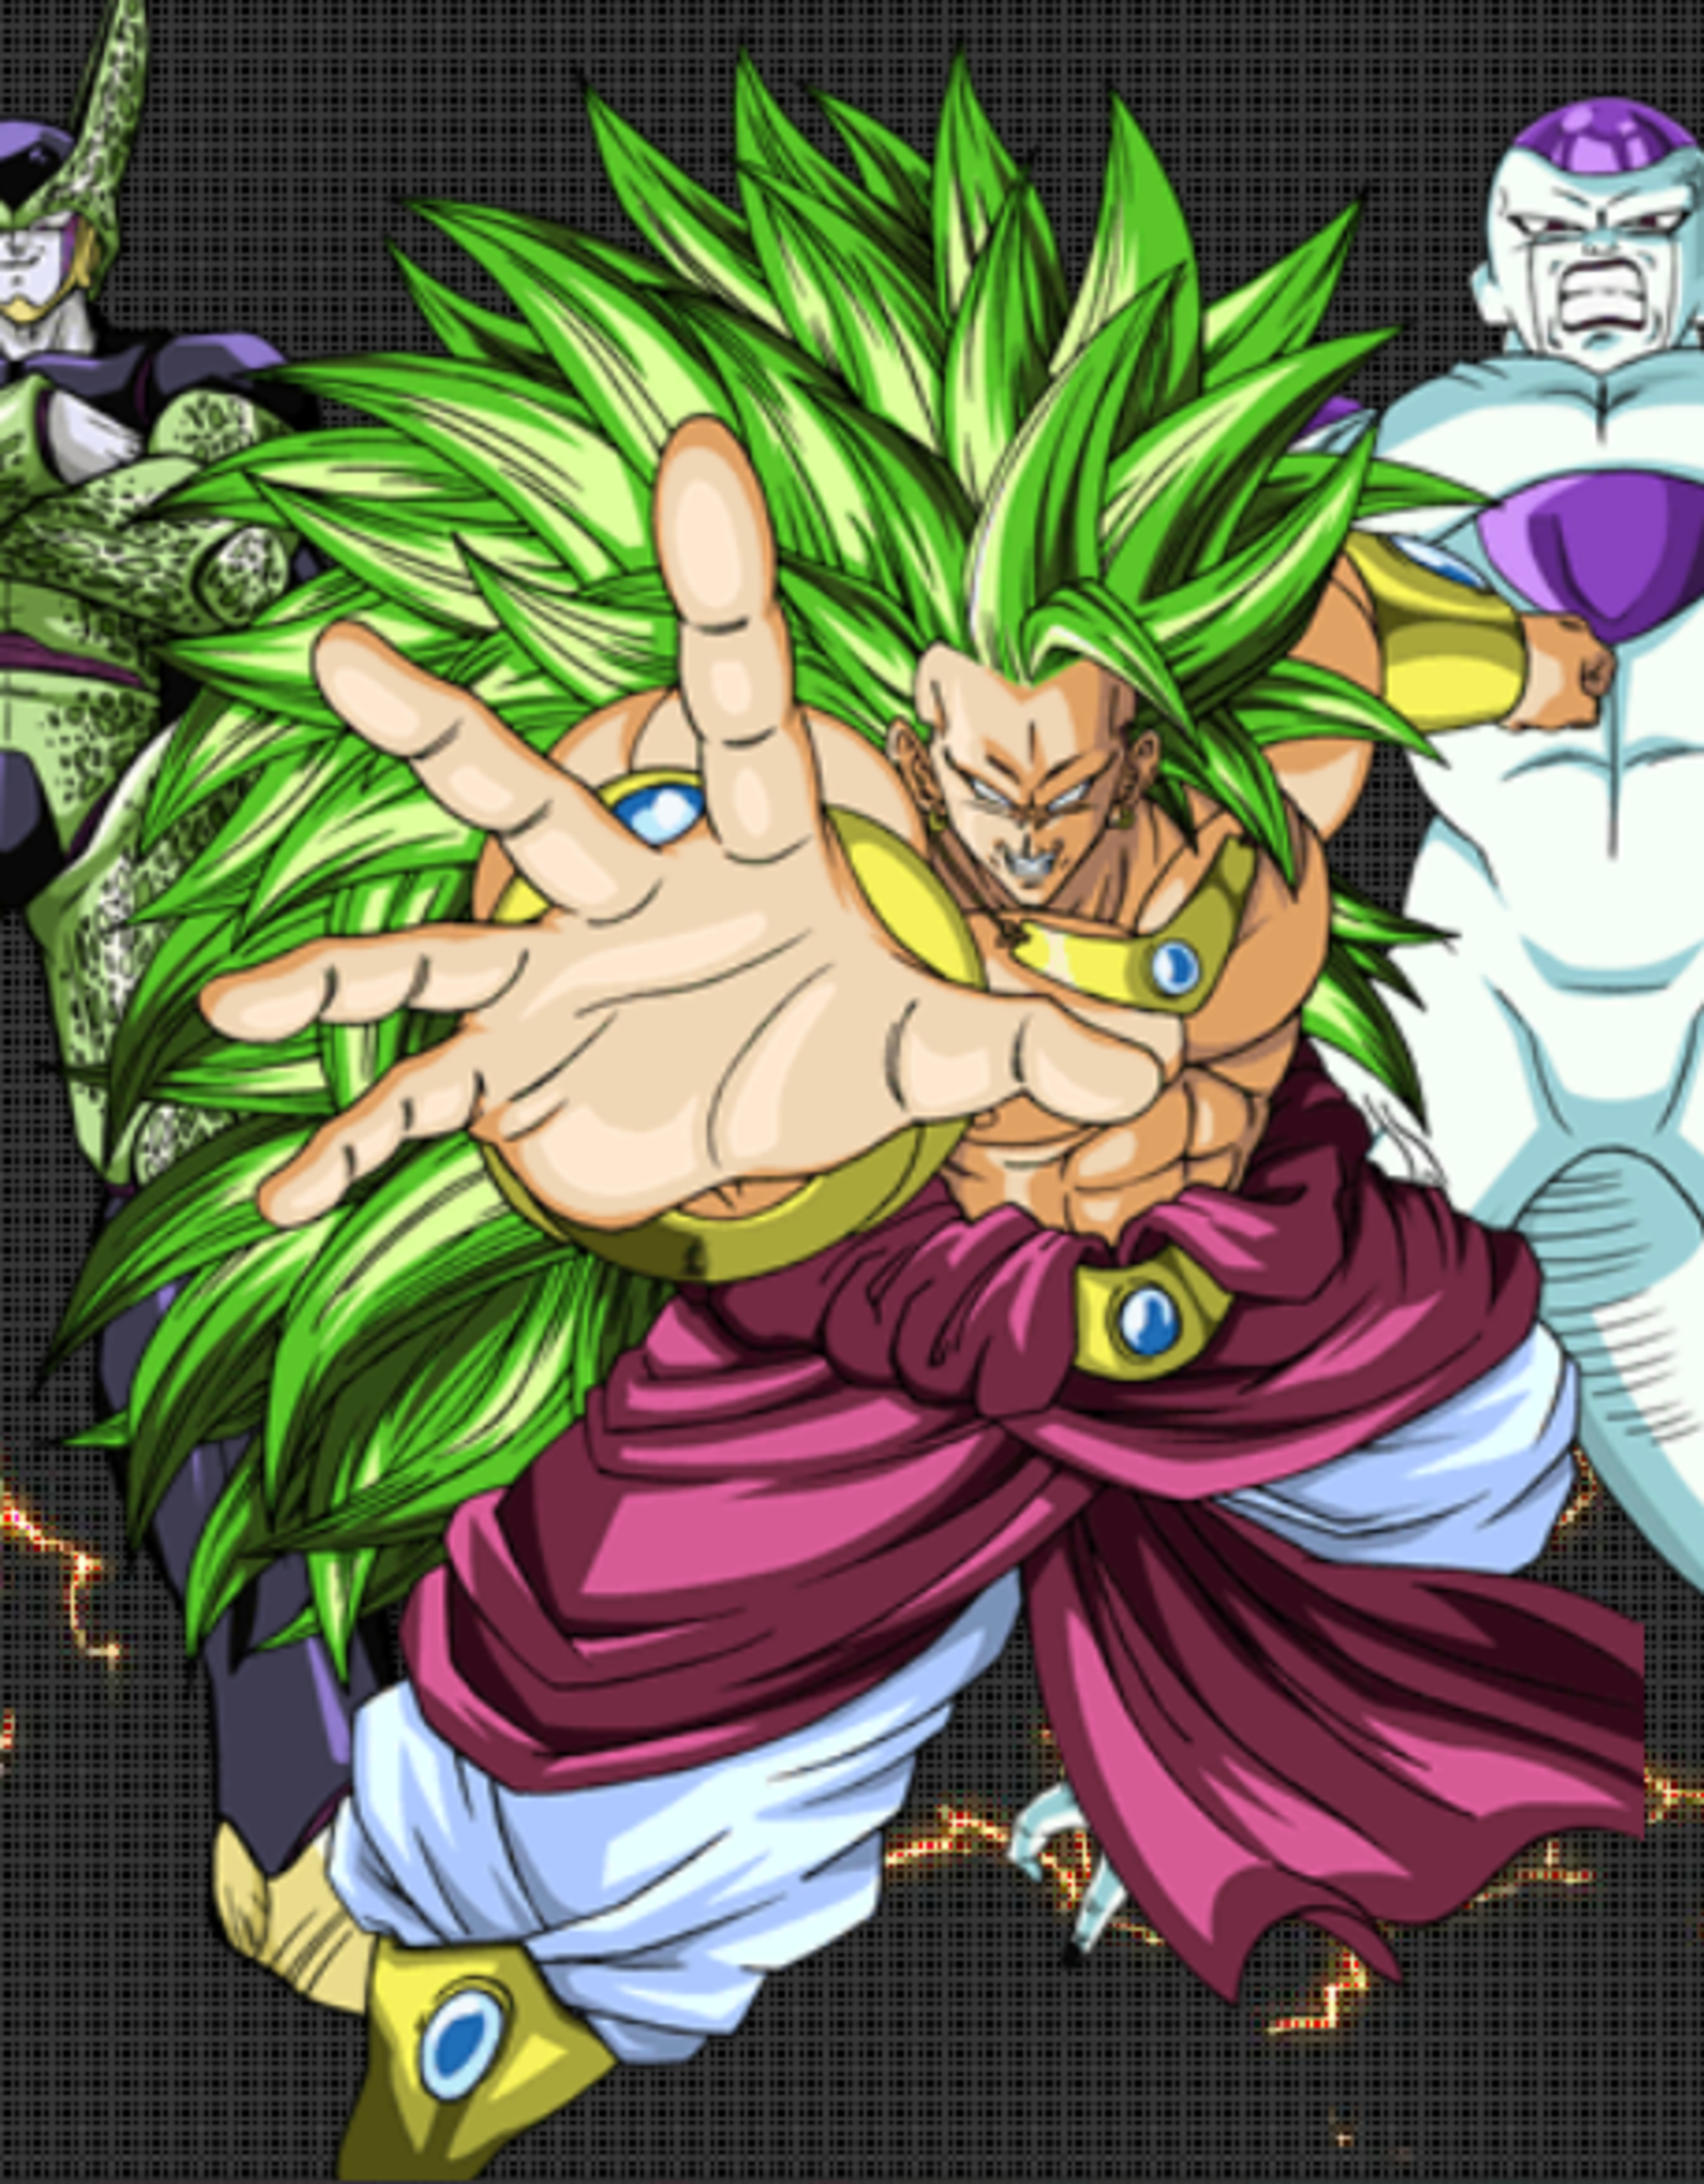 It's confirmed! New Dragon Ball Super movie will bring back Broly, the  legendary Super Saiyan